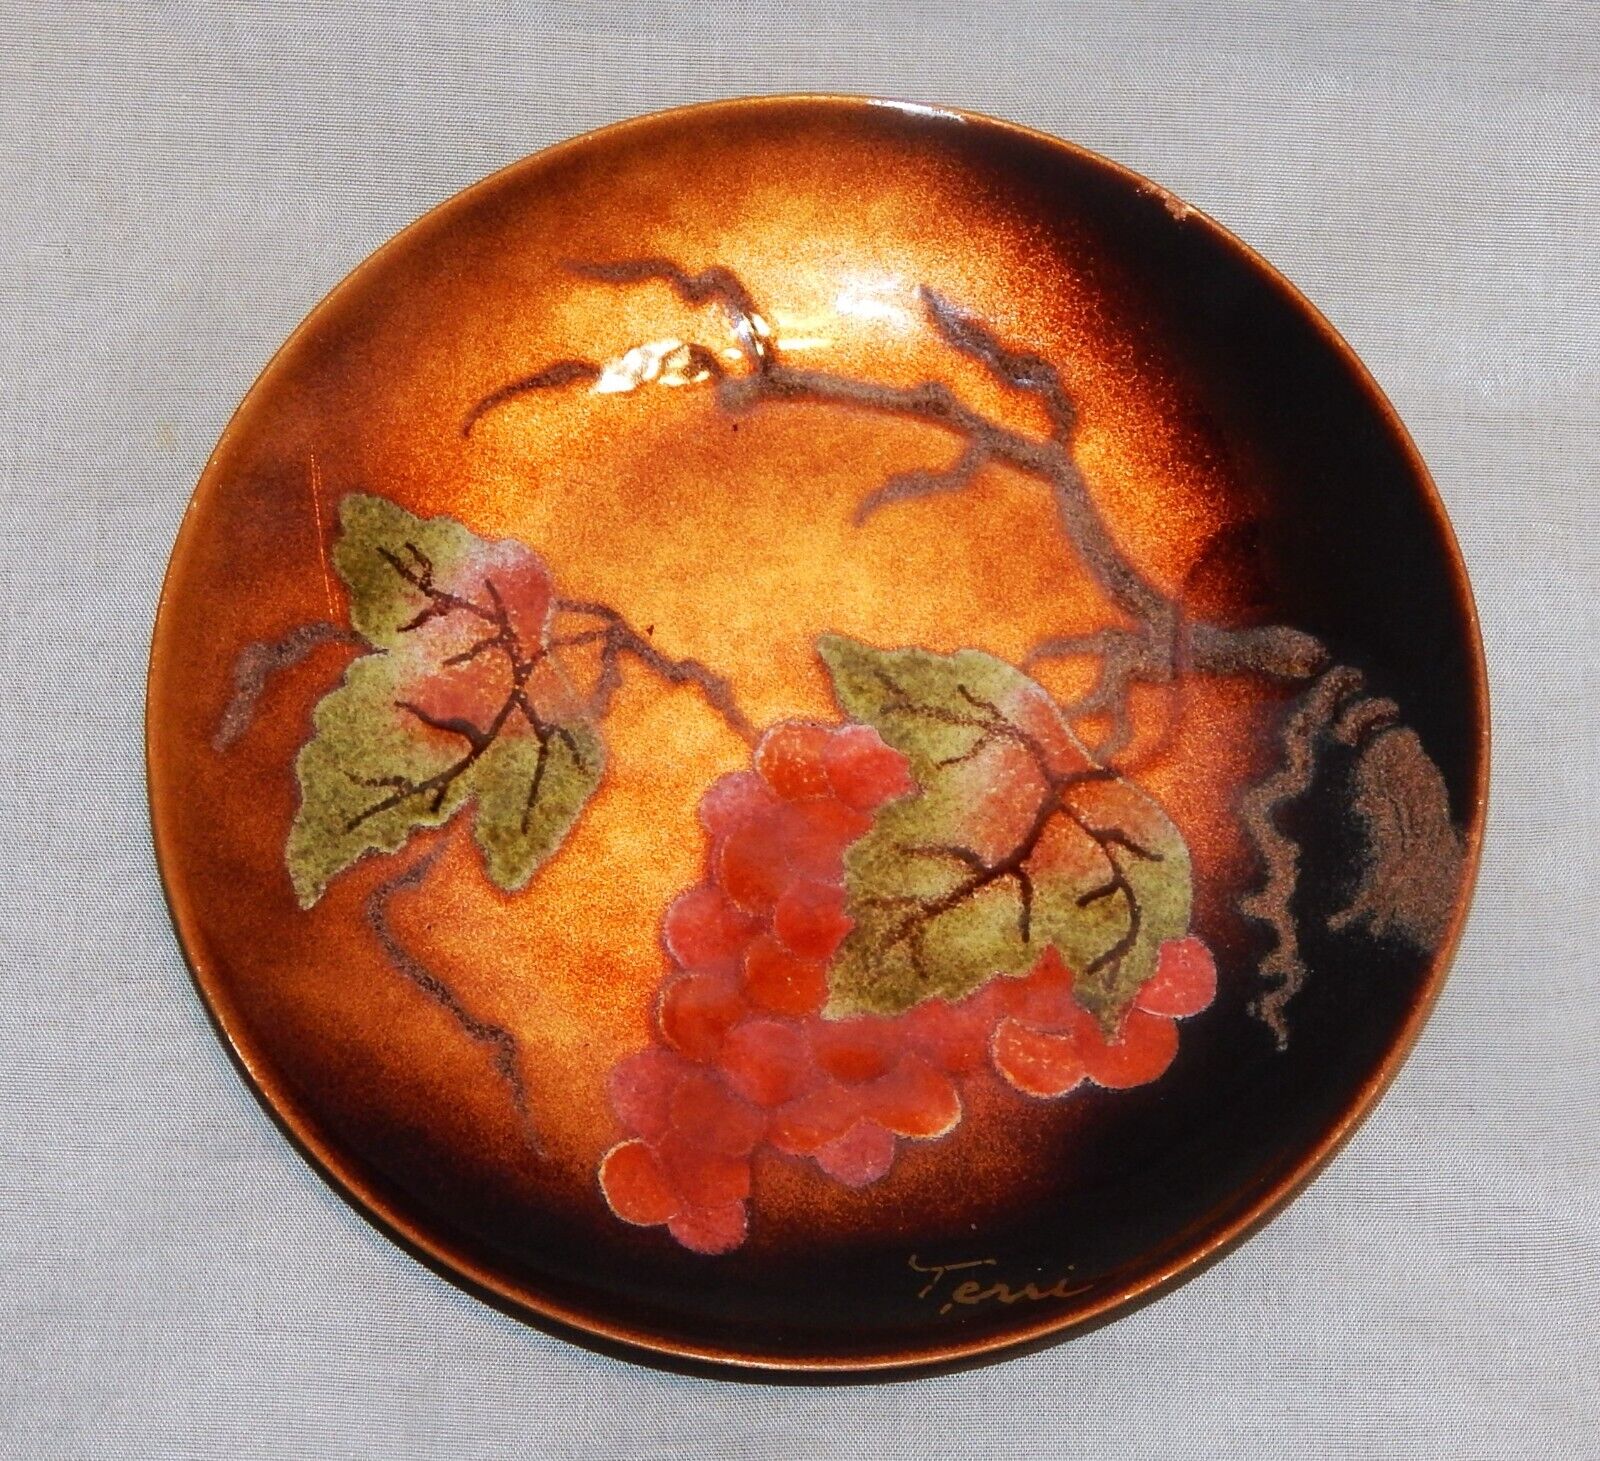 Vintage Bovano of Cheshire Conn. Enamel on Copper Plate with Grapes signed Terri